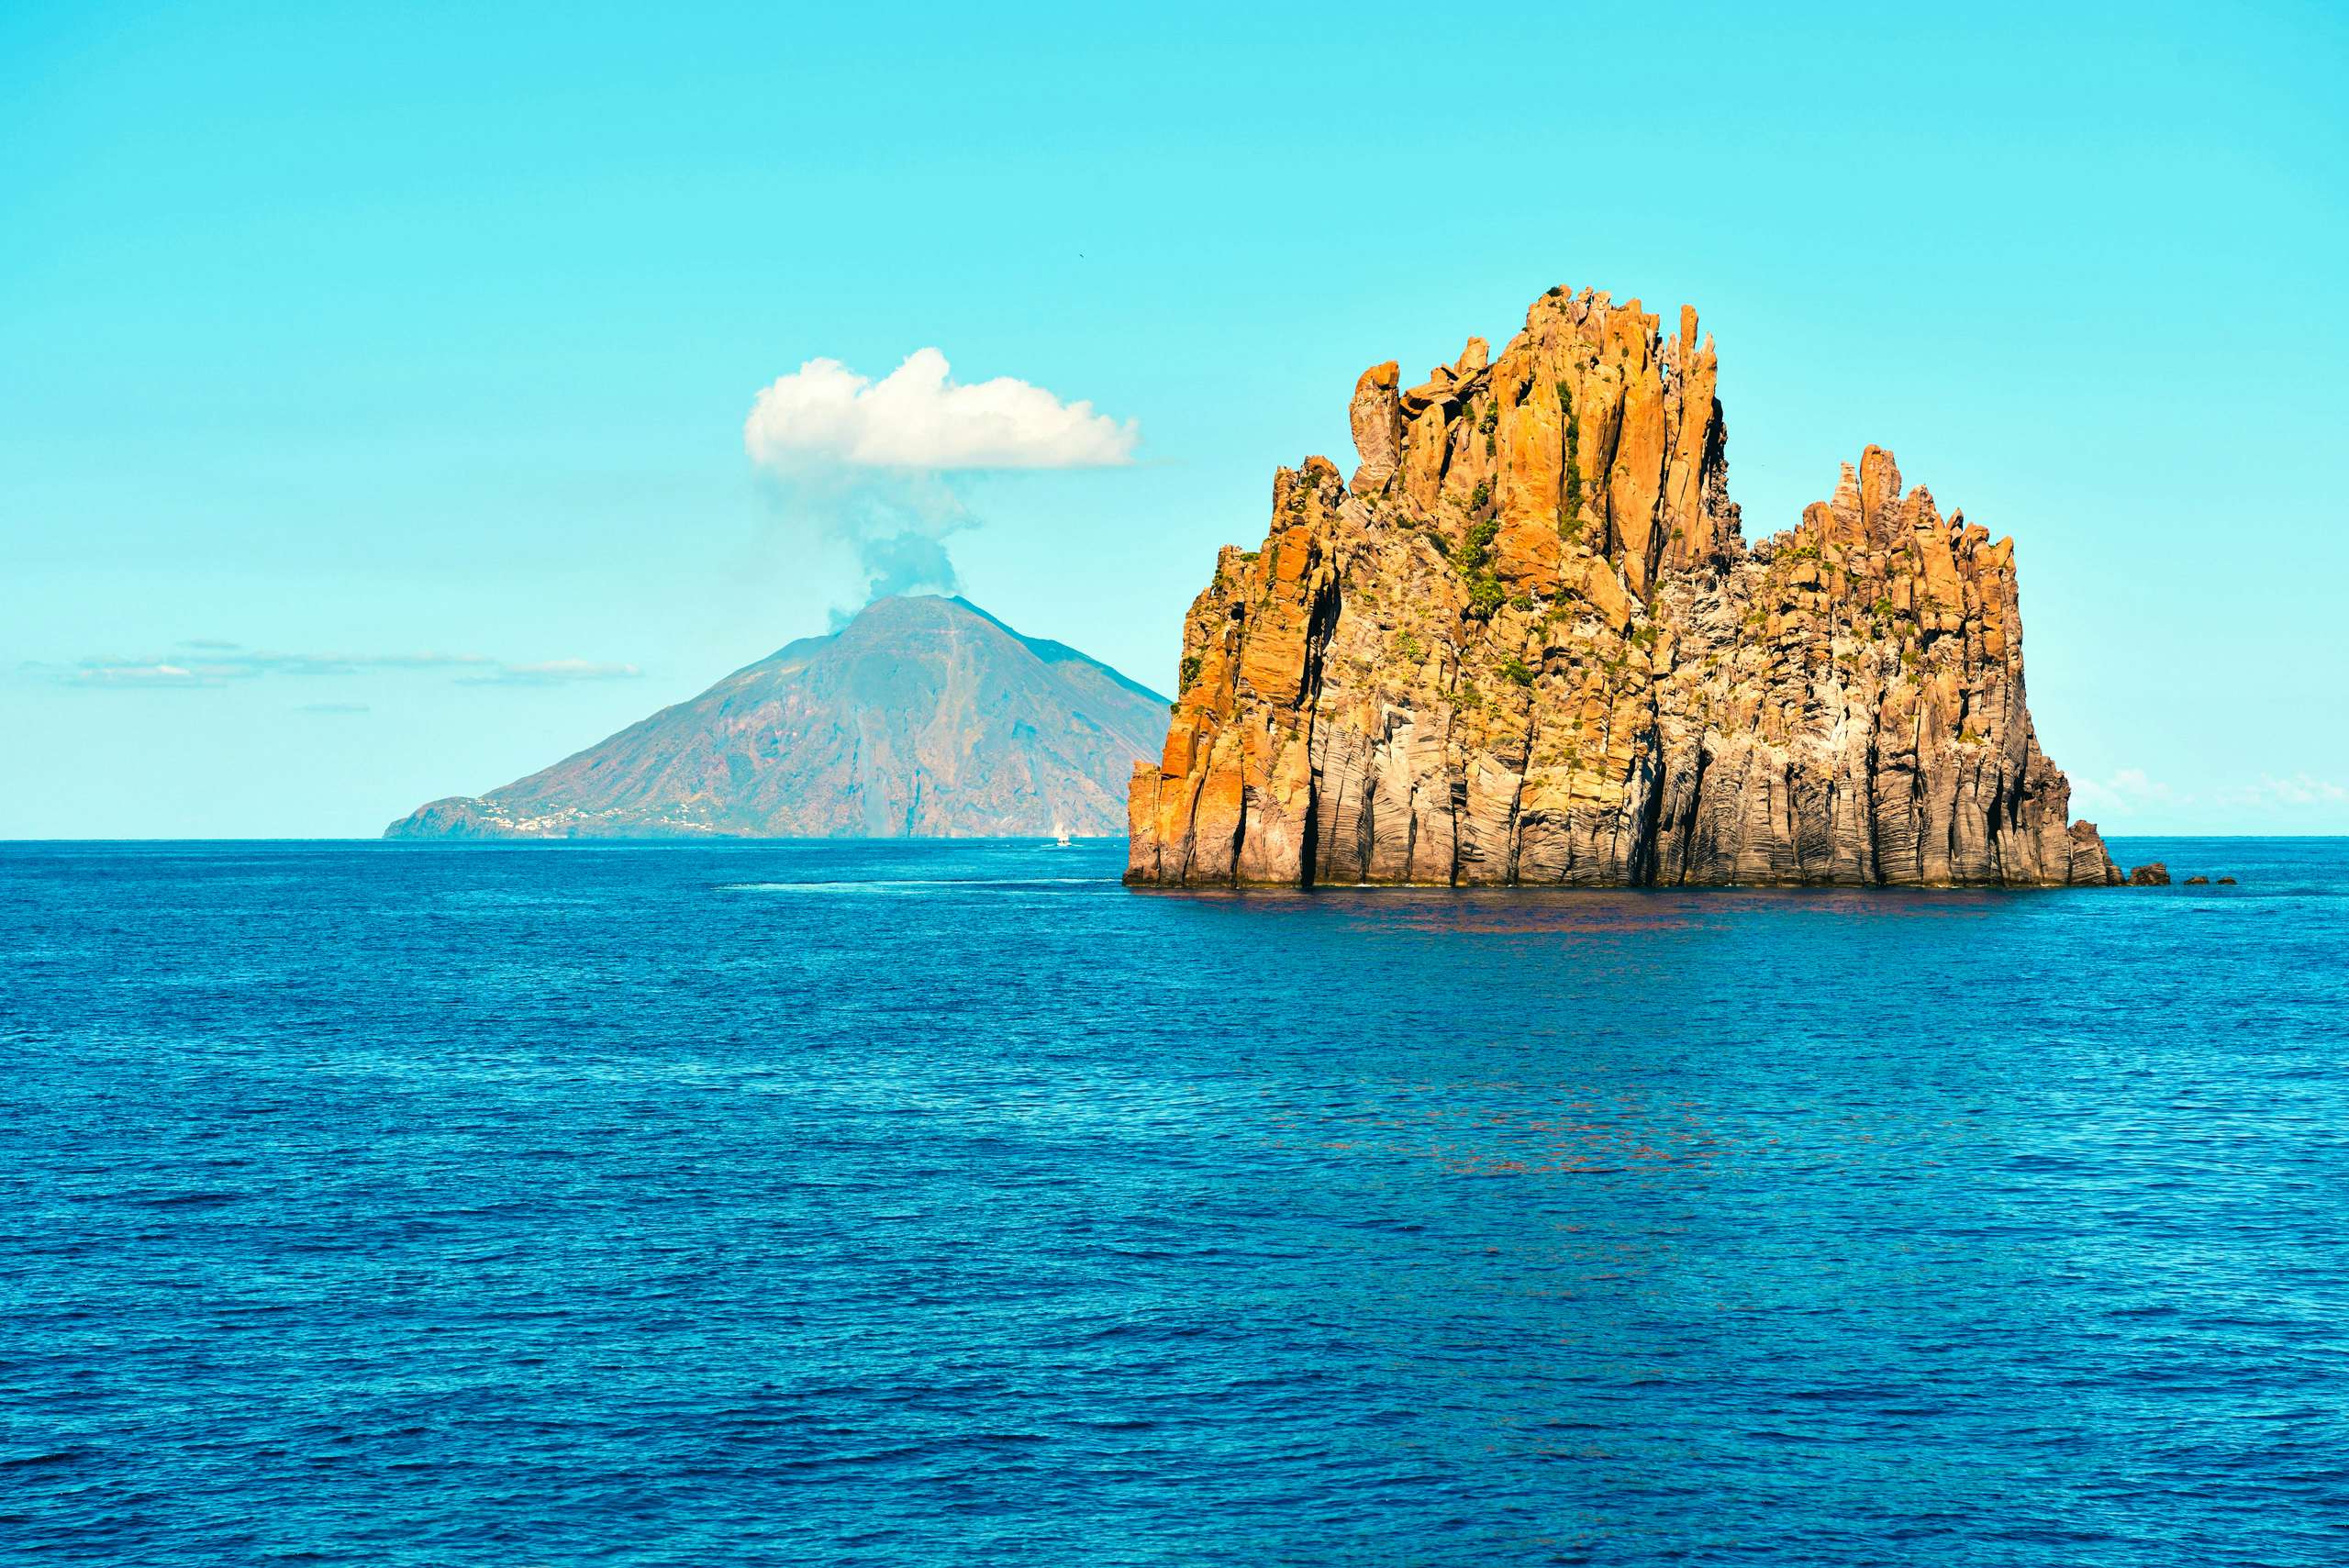 A unique rocky islet off the coast of Sicily, viewed from a yacht chartered with N&J, showcasing potential exploration sites.